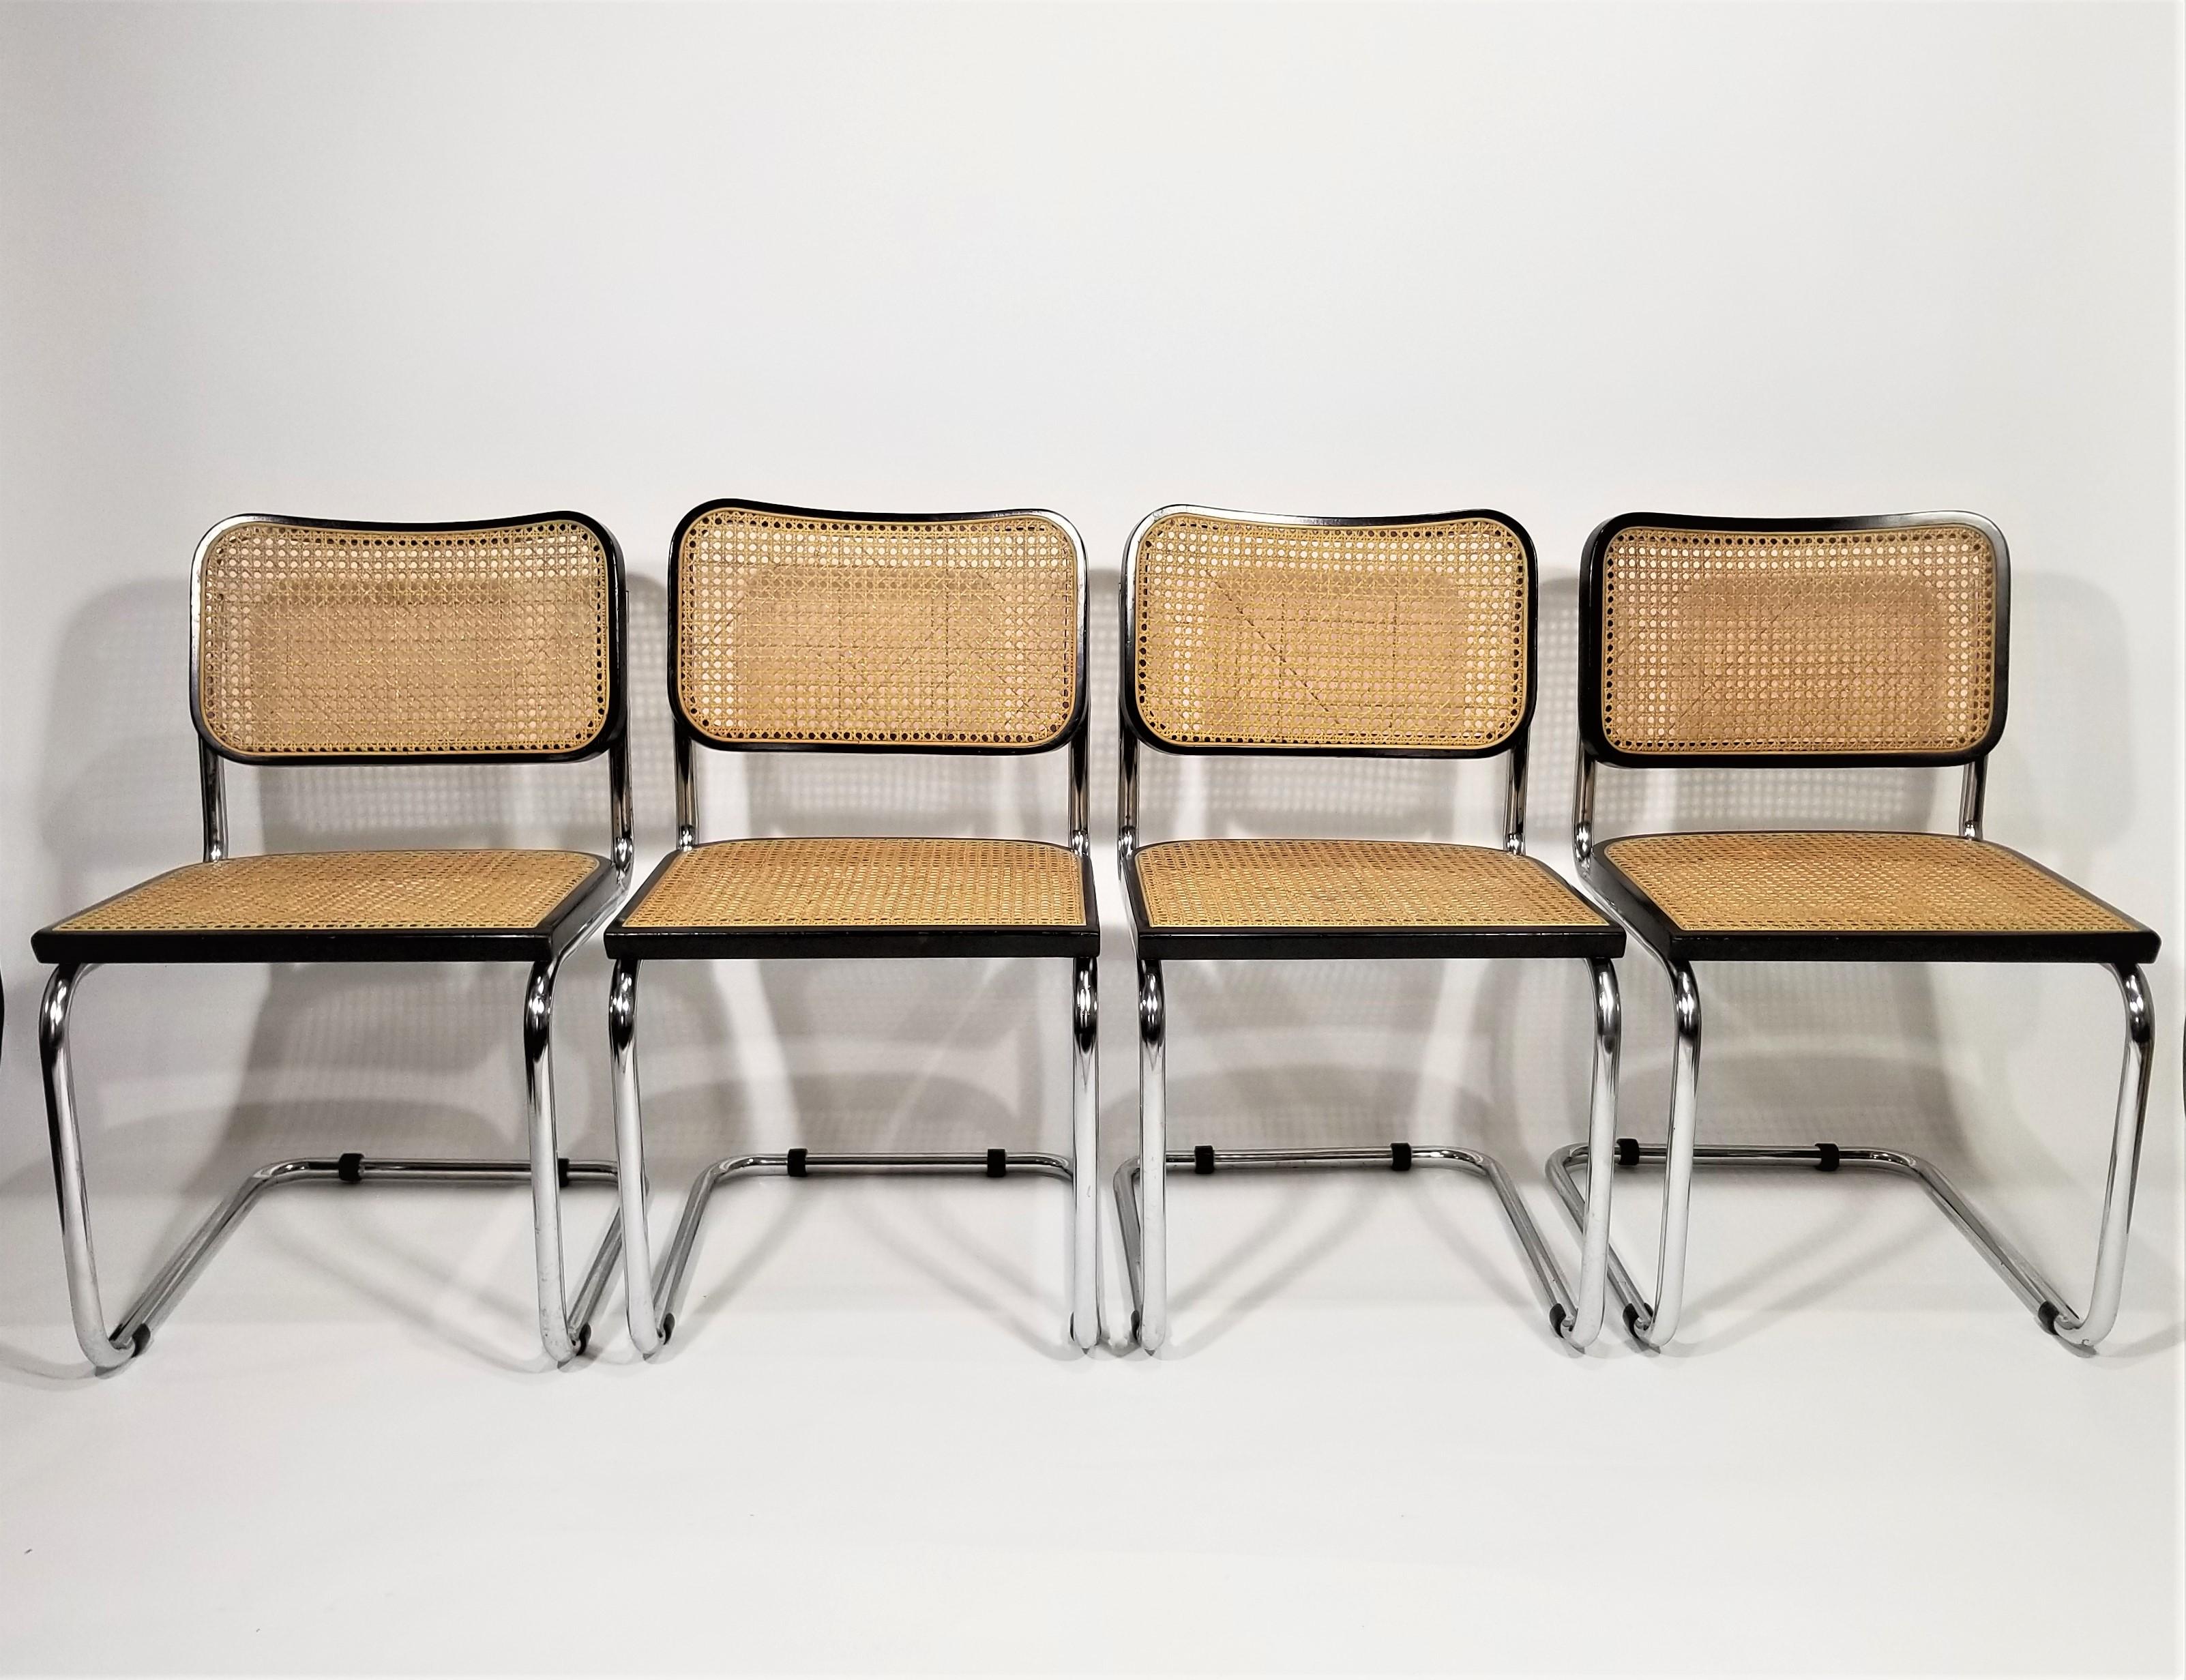 1960s Mid Century Black Marcel Breuer Cesca side chairs. Made in Italy. All parts are original. Cane seats and backs. Classic Chrome Cantilever frames. We polish all chrome. 

The chair on the far right has some very slight differences on close